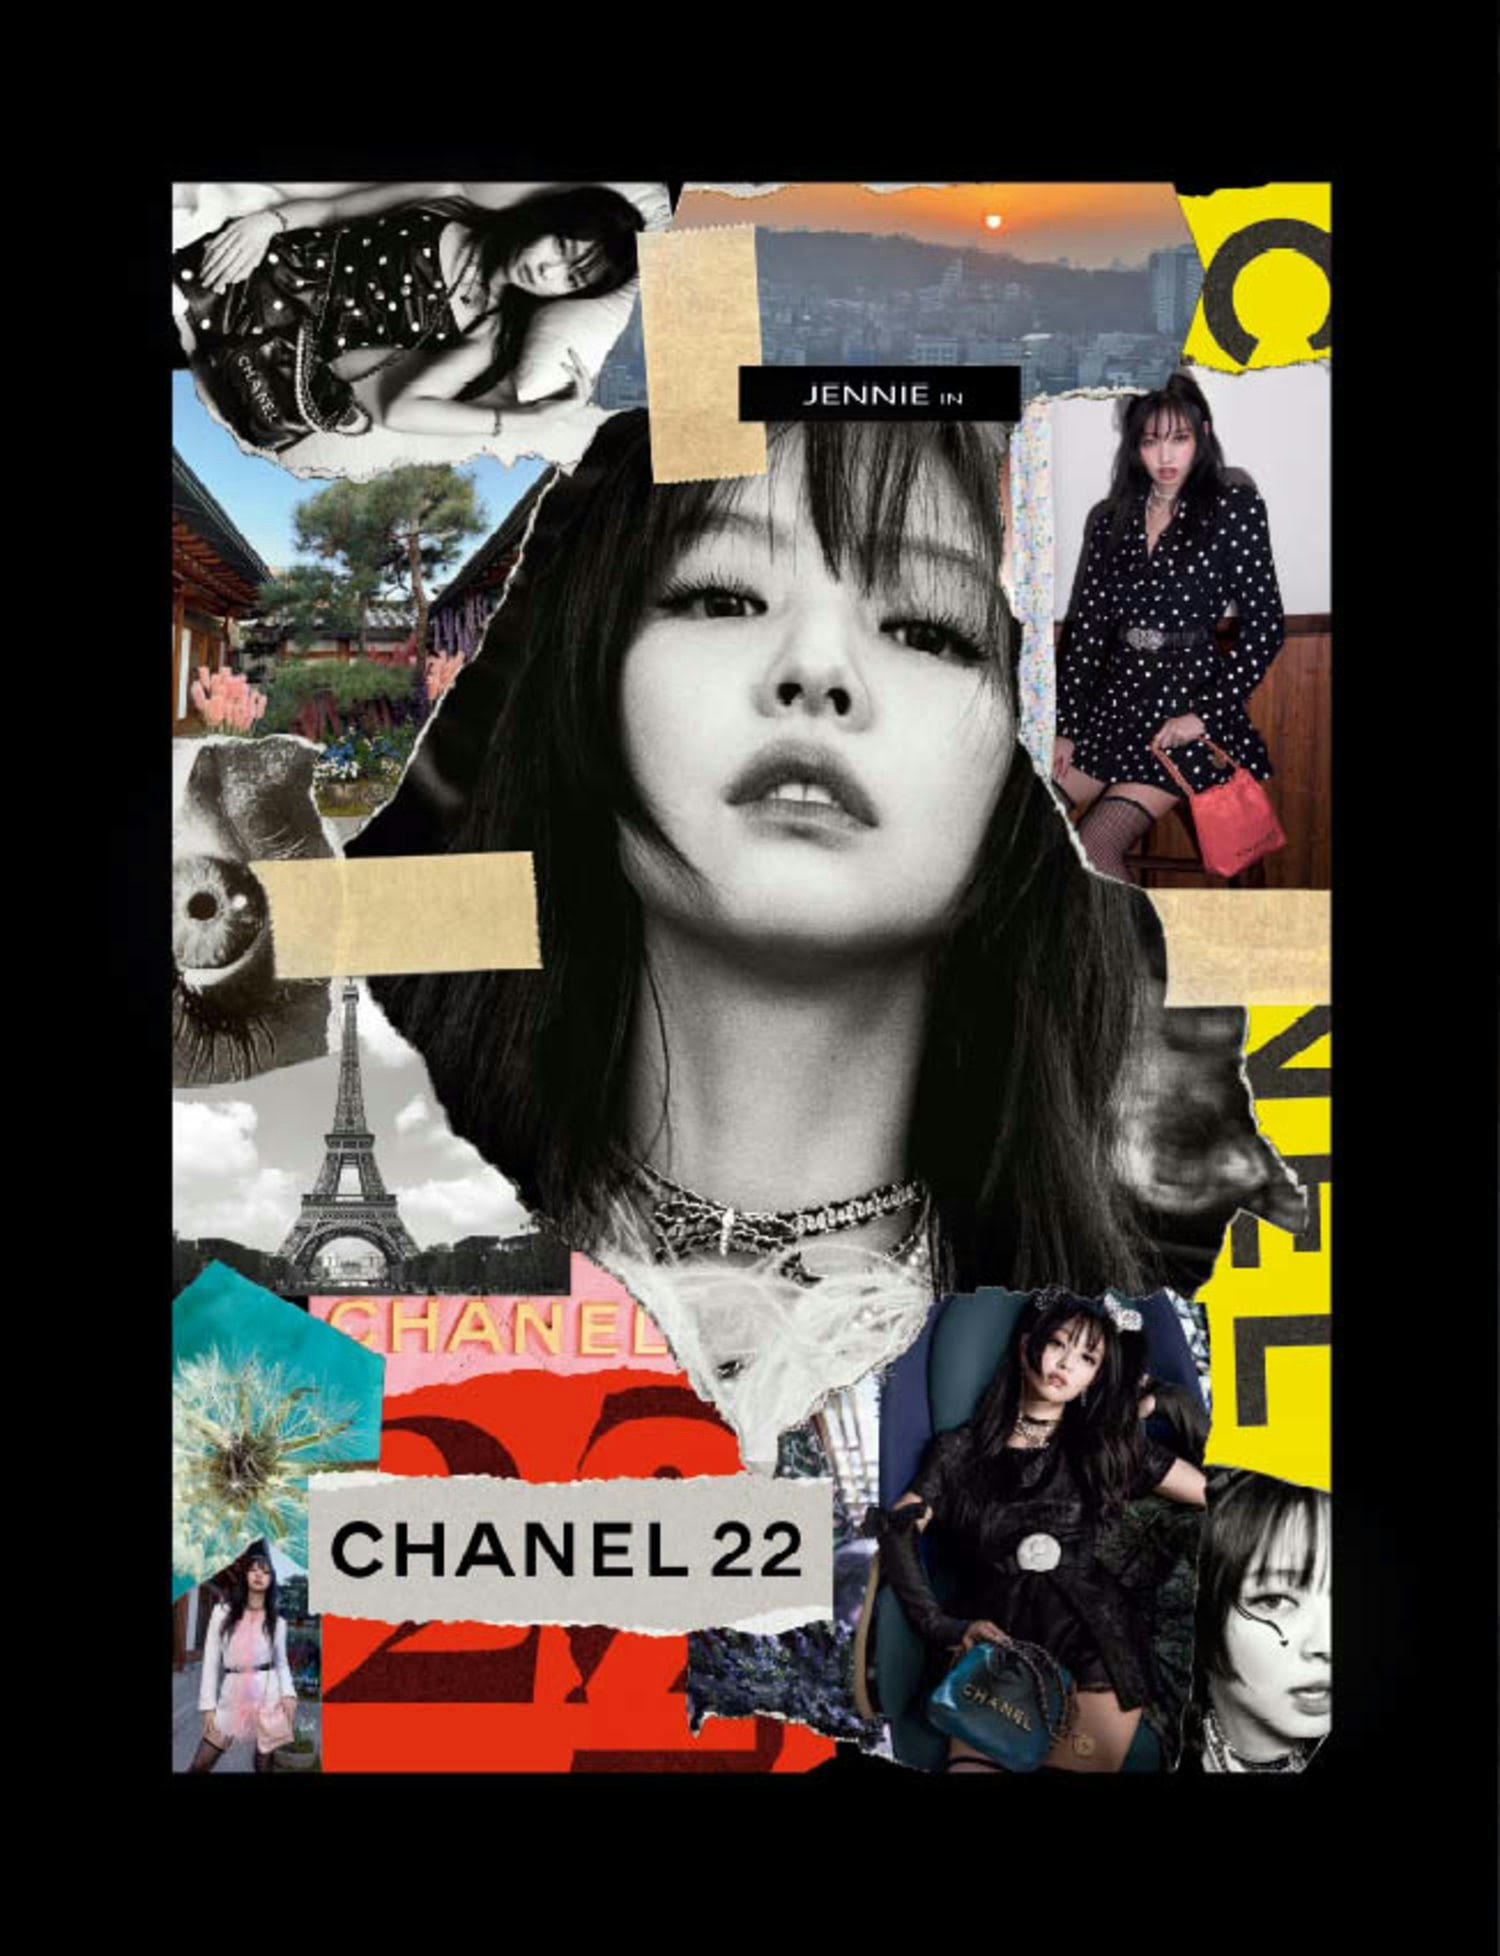 Watch Jennie Kims Campaign Film For The Chanel 22 Bag  KOLOR MAGAZINE